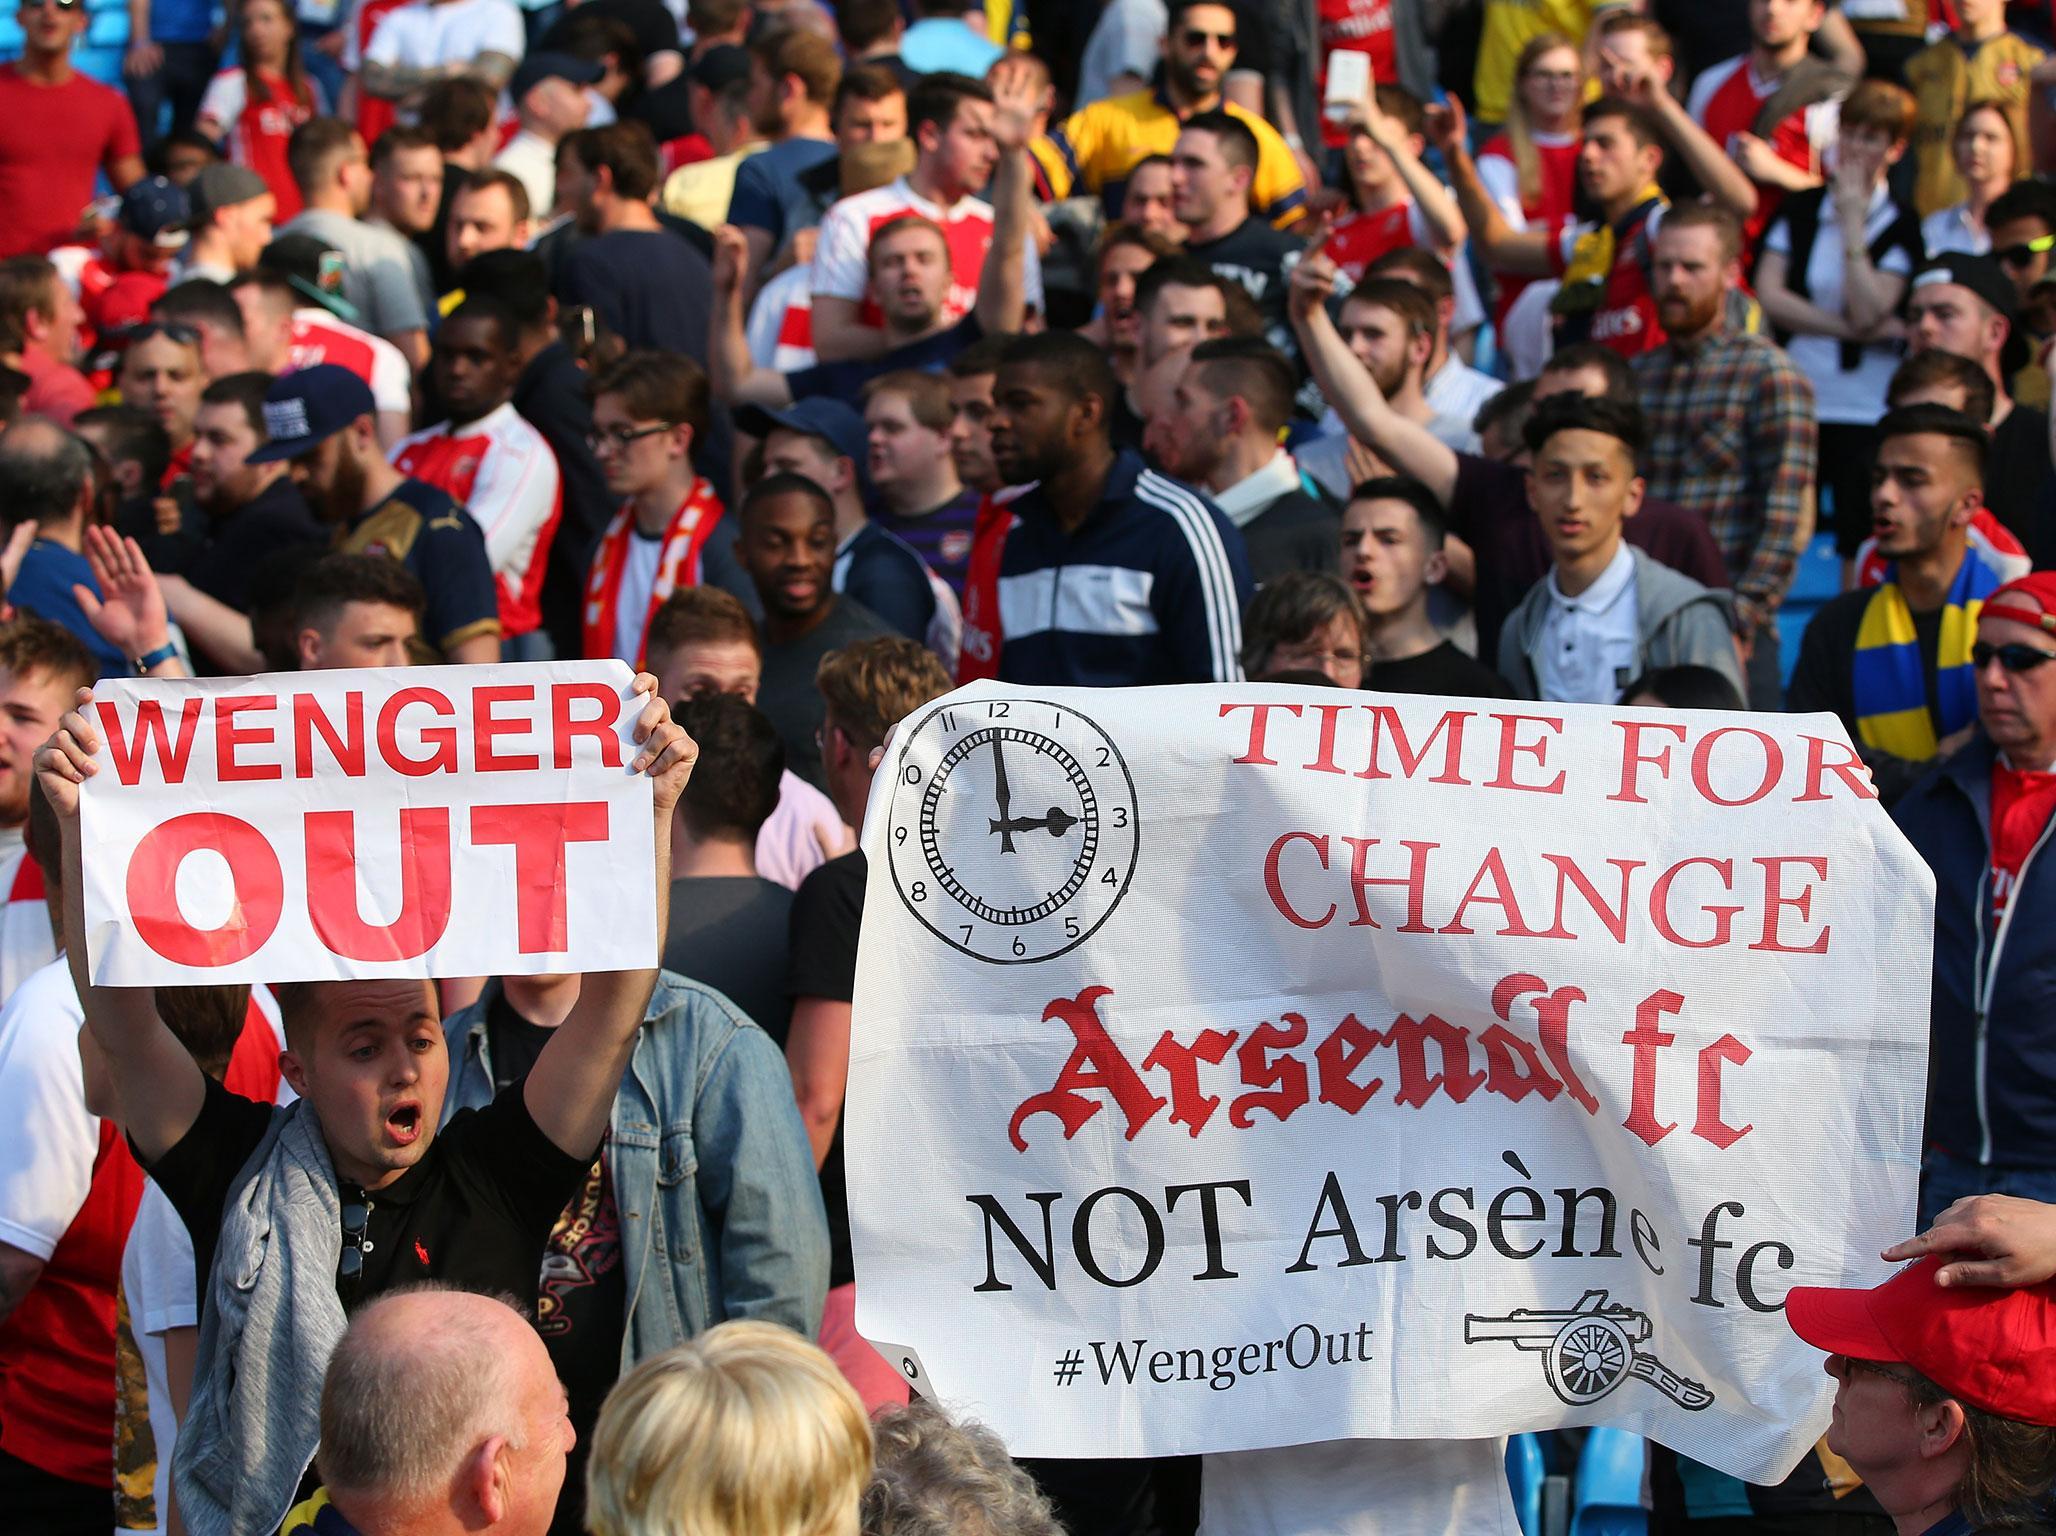 A vocal minority wanted Arsene Wenger sacked but the club stuck by the manager